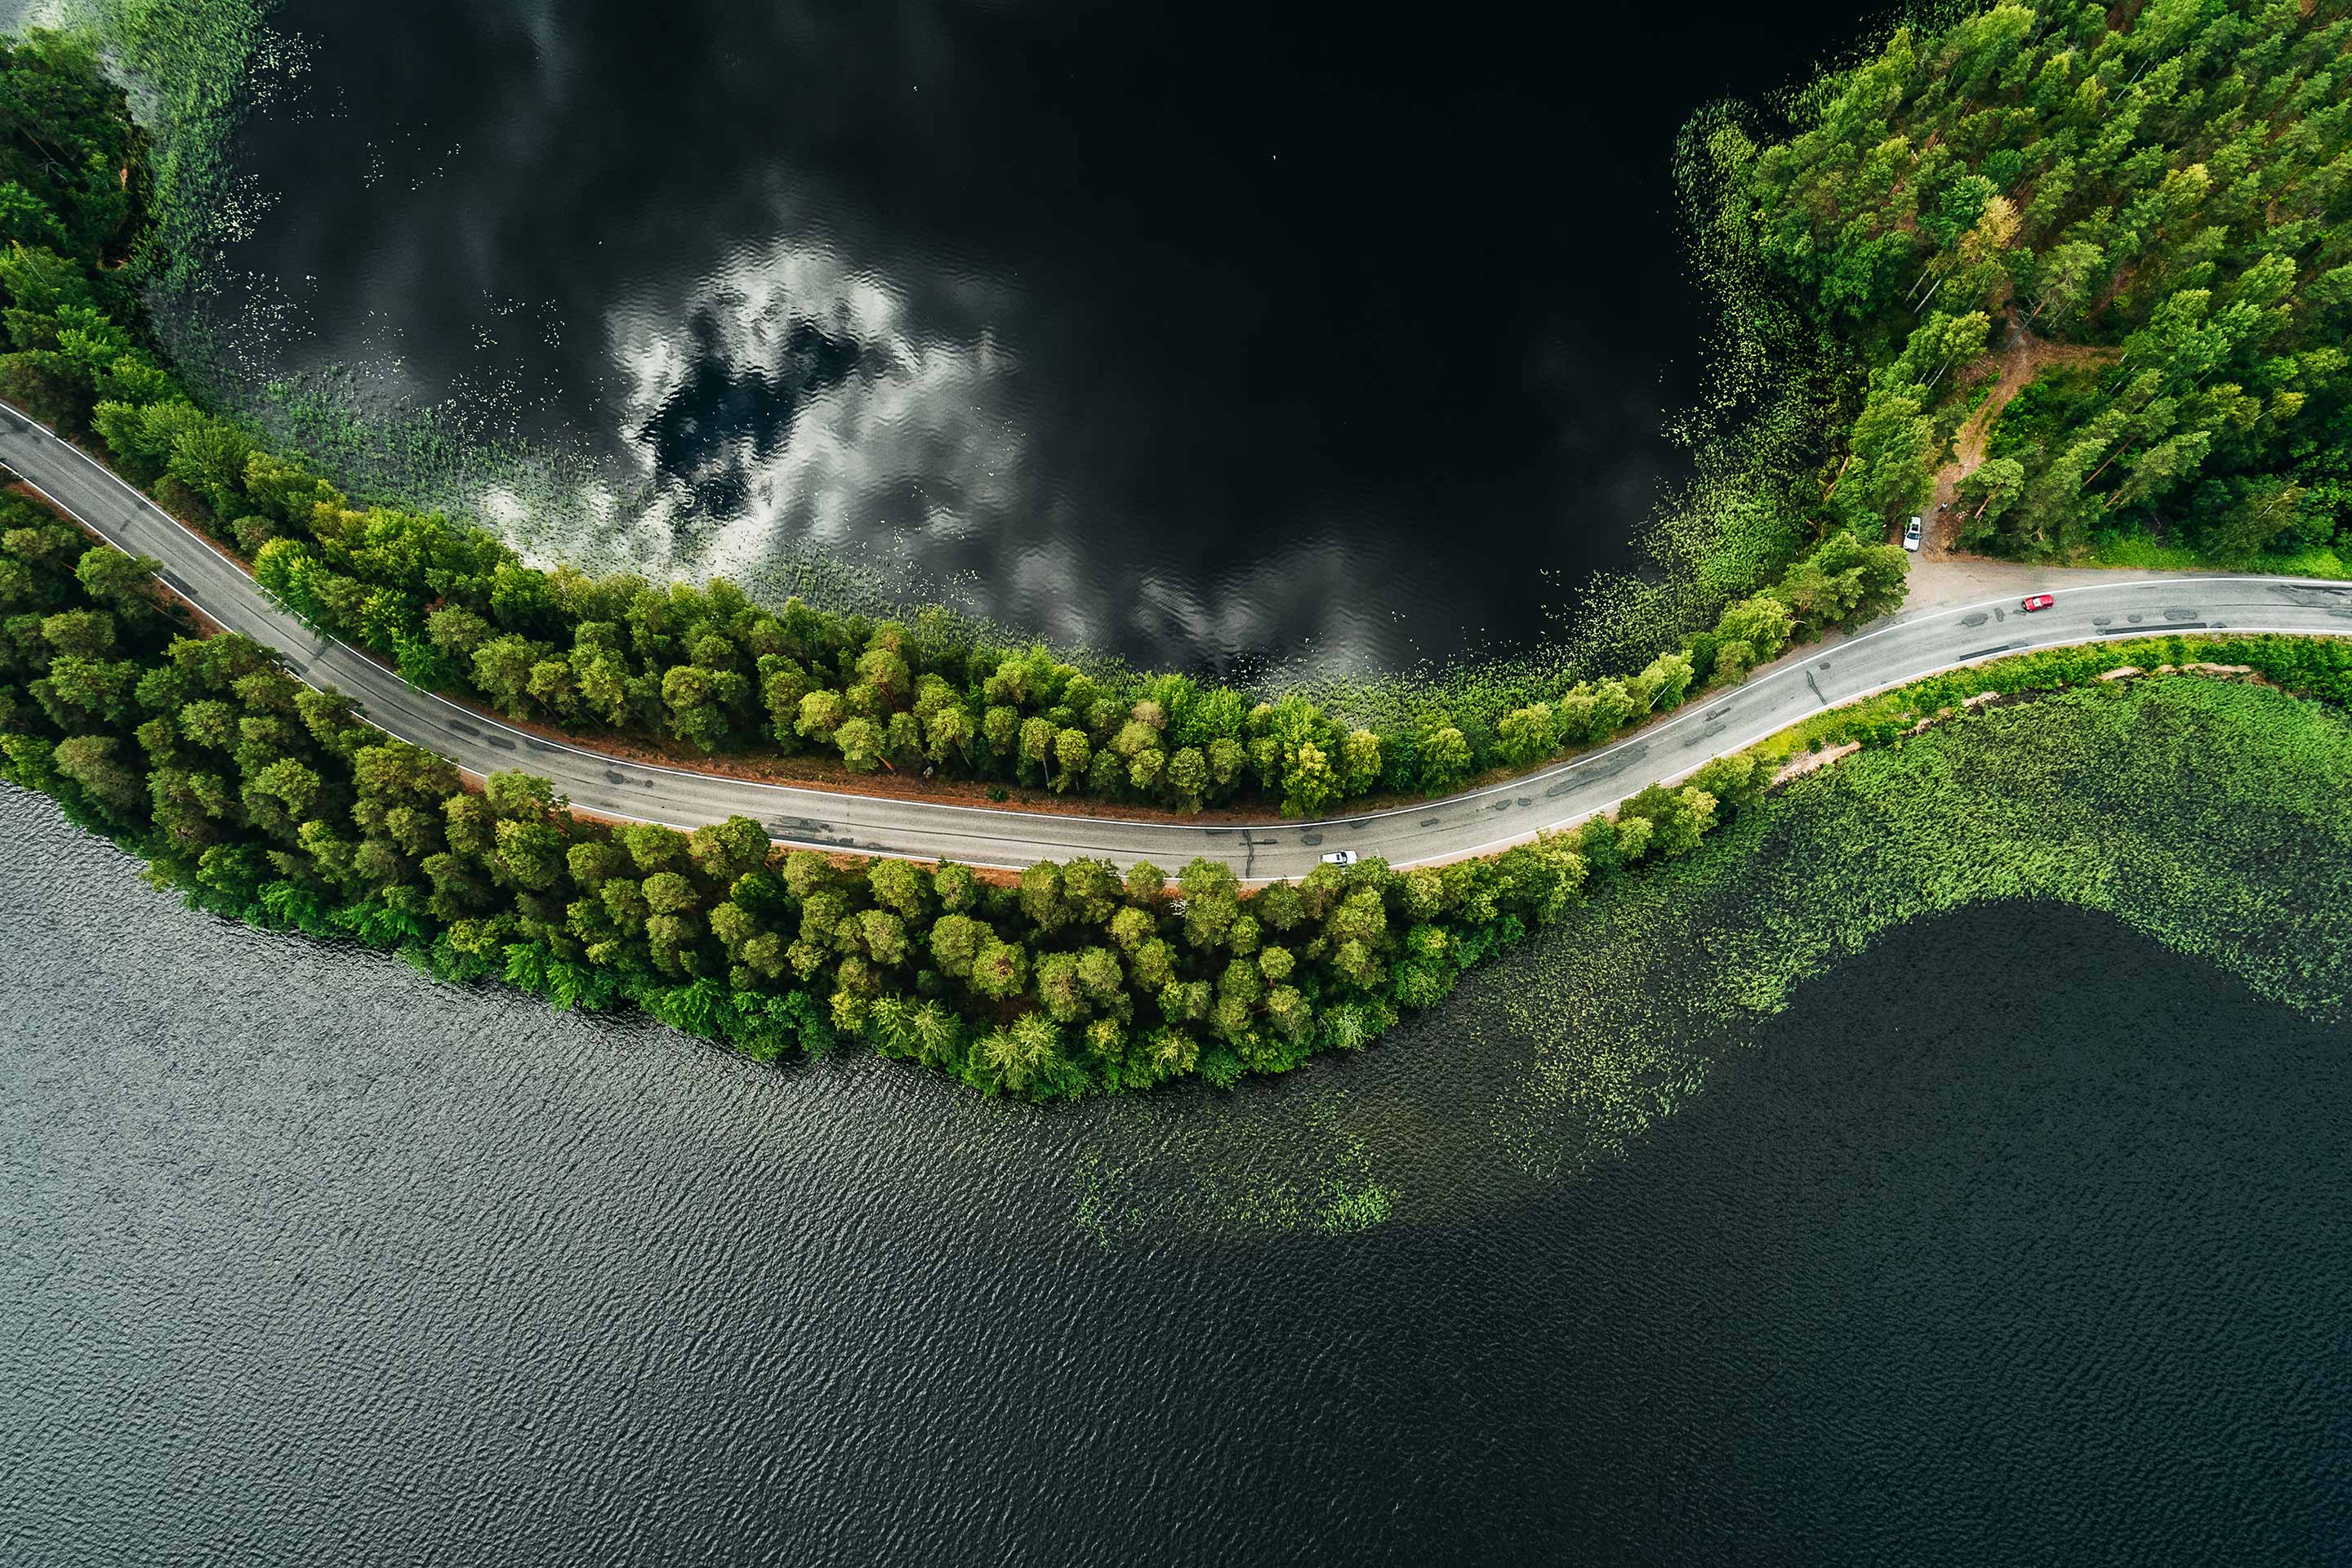 An overhead image of a road, with water on both sides, as a metaphor for connecting investment goals